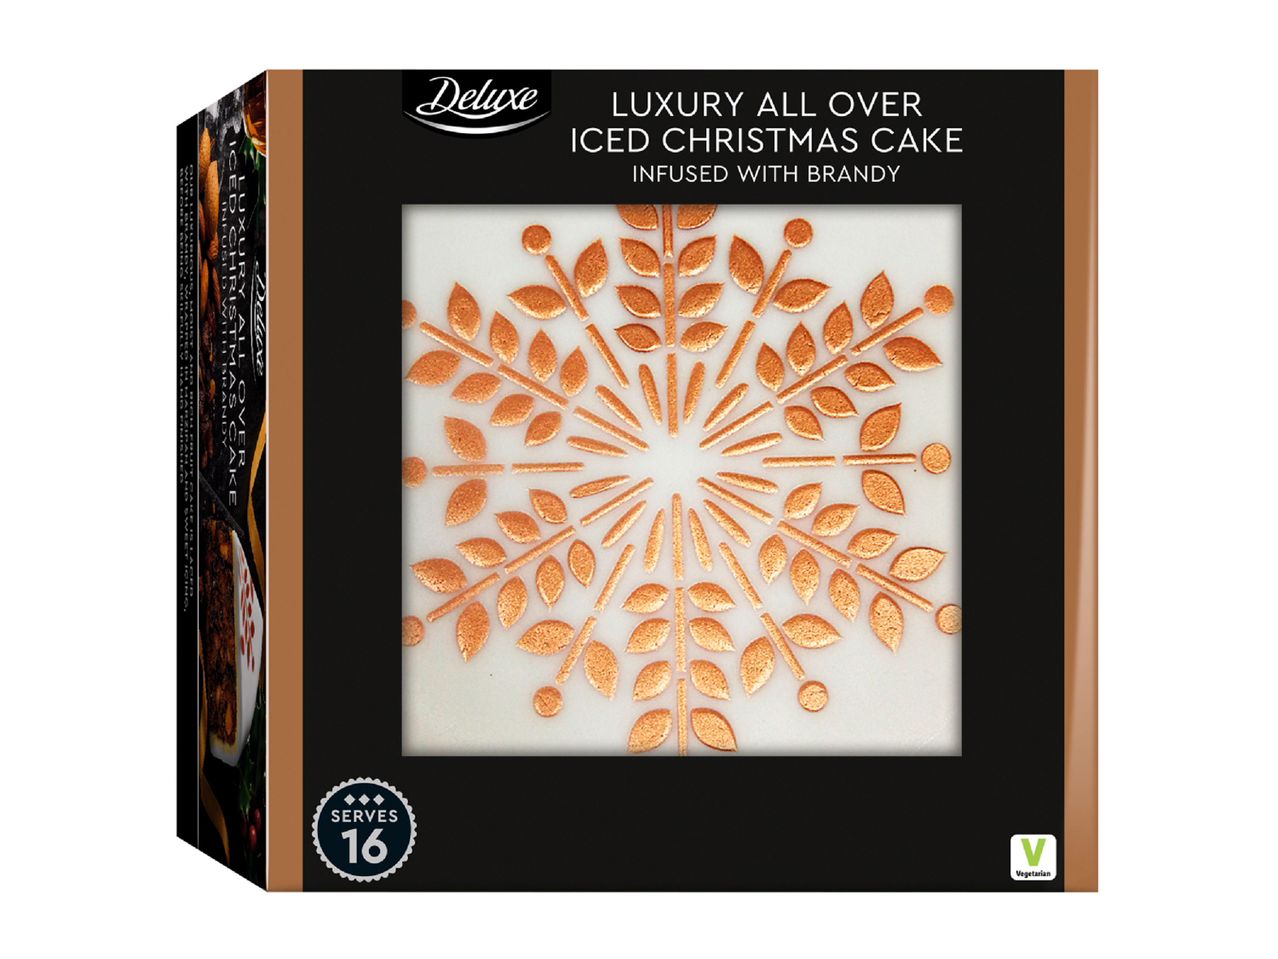 Go to full screen view: Deluxe Luxury All Over Iced Christmas Cake - Image 1